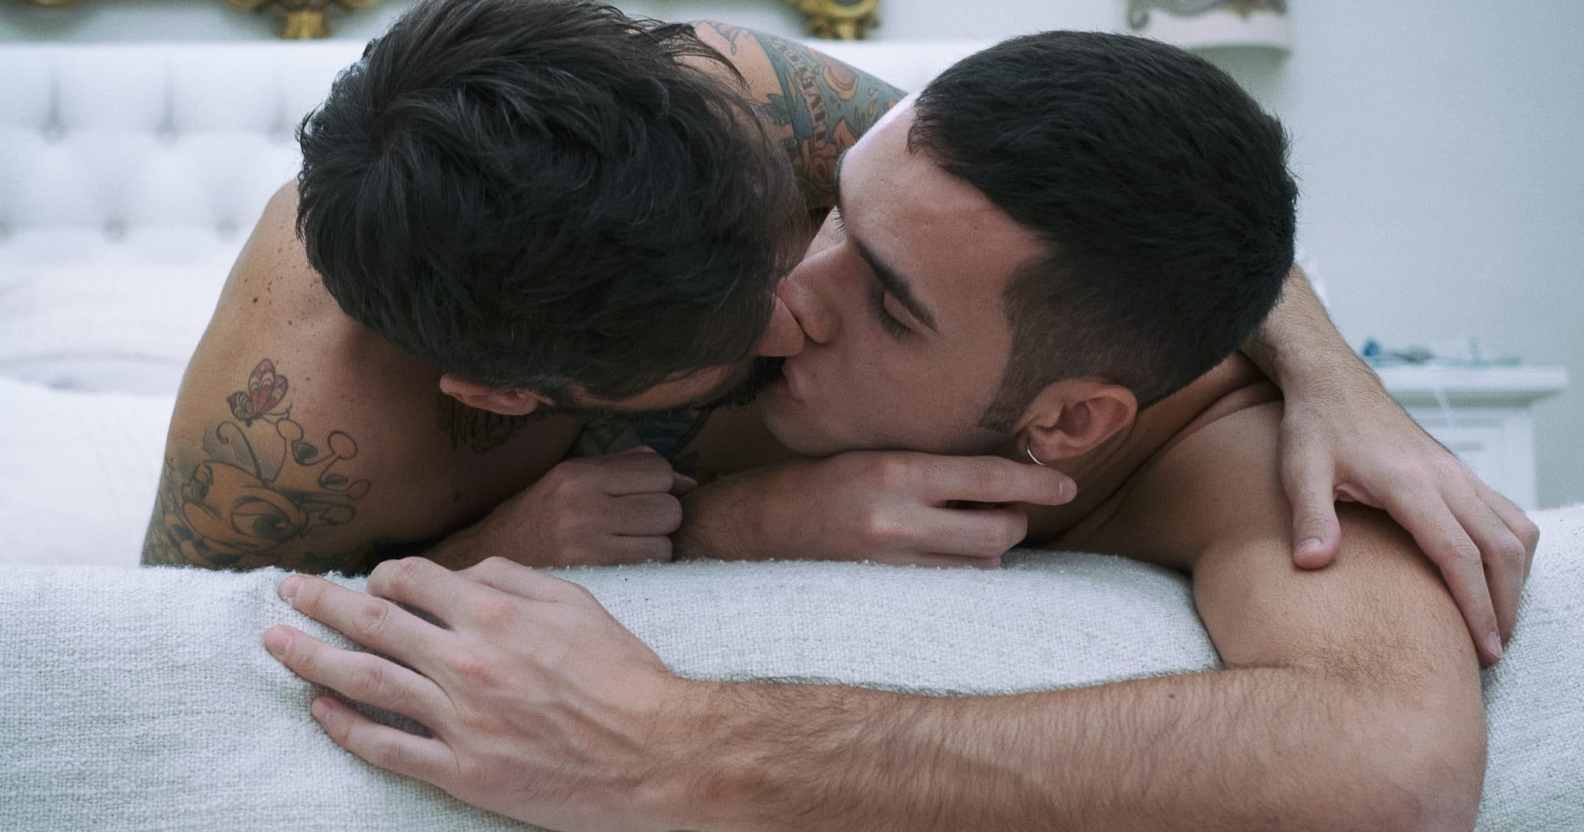 Lesbian Porn For Gays - Gay porn: I'm a lesbian who loves gay male porn. Here's why